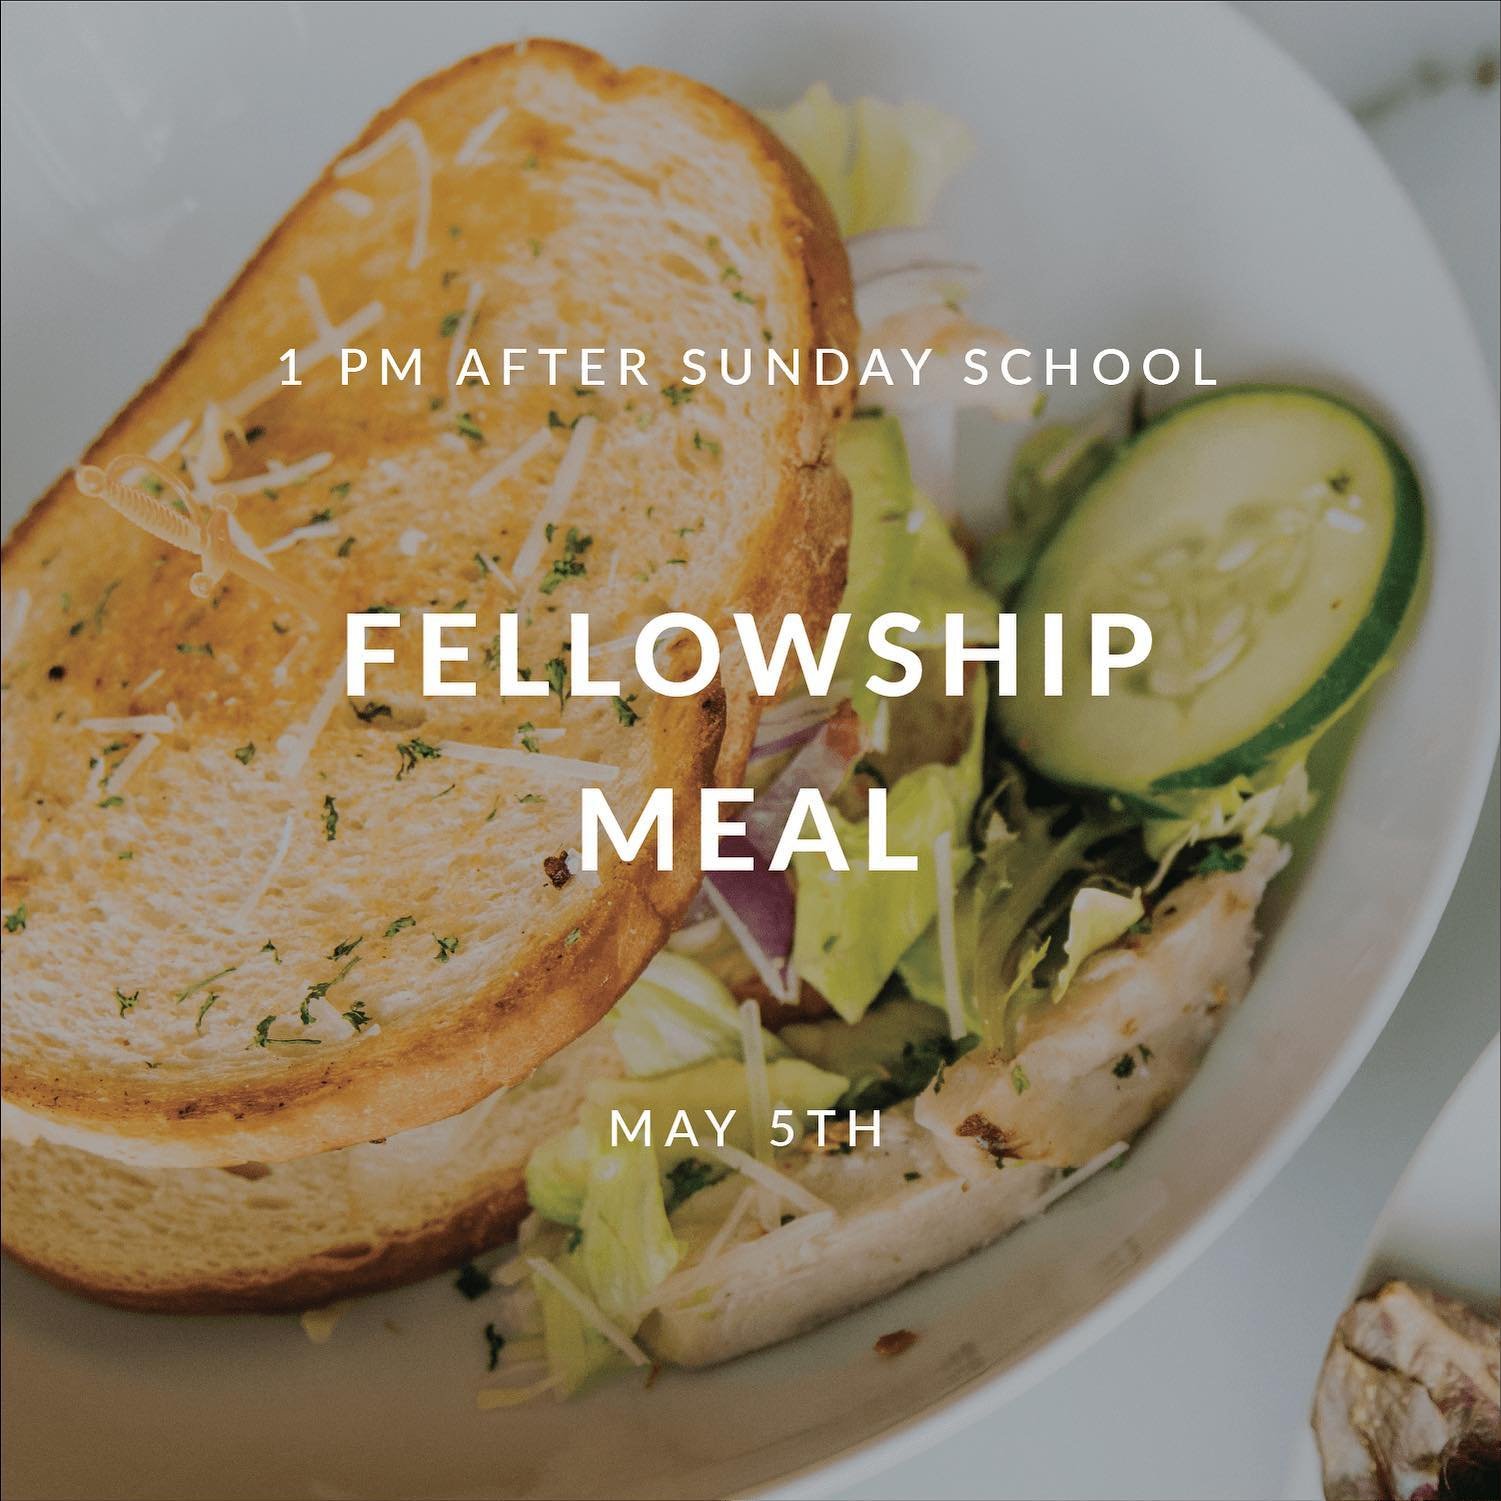 we have a fellowship meal this sunday! 

📞contact karen veldheer for more info!
🥪please bring a soup, salad, or sandwich dish to share!
👟bring walking shoes for a walk around Wilson Park afterwards!

hope to see you there!! ❤️